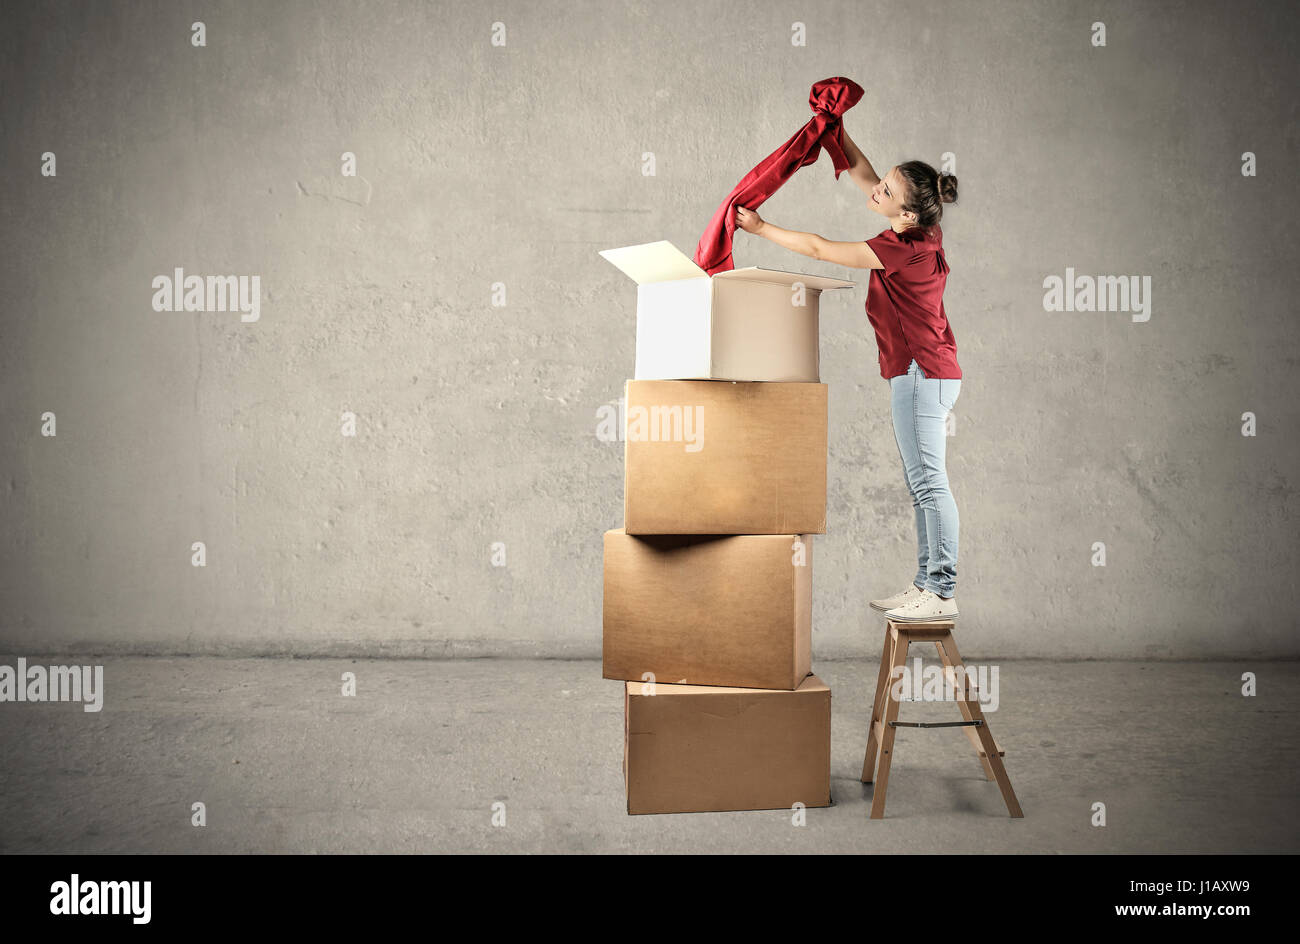 https://c8.alamy.com/comp/J1AXW9/woman-packing-out-of-boxes-J1AXW9.jpg